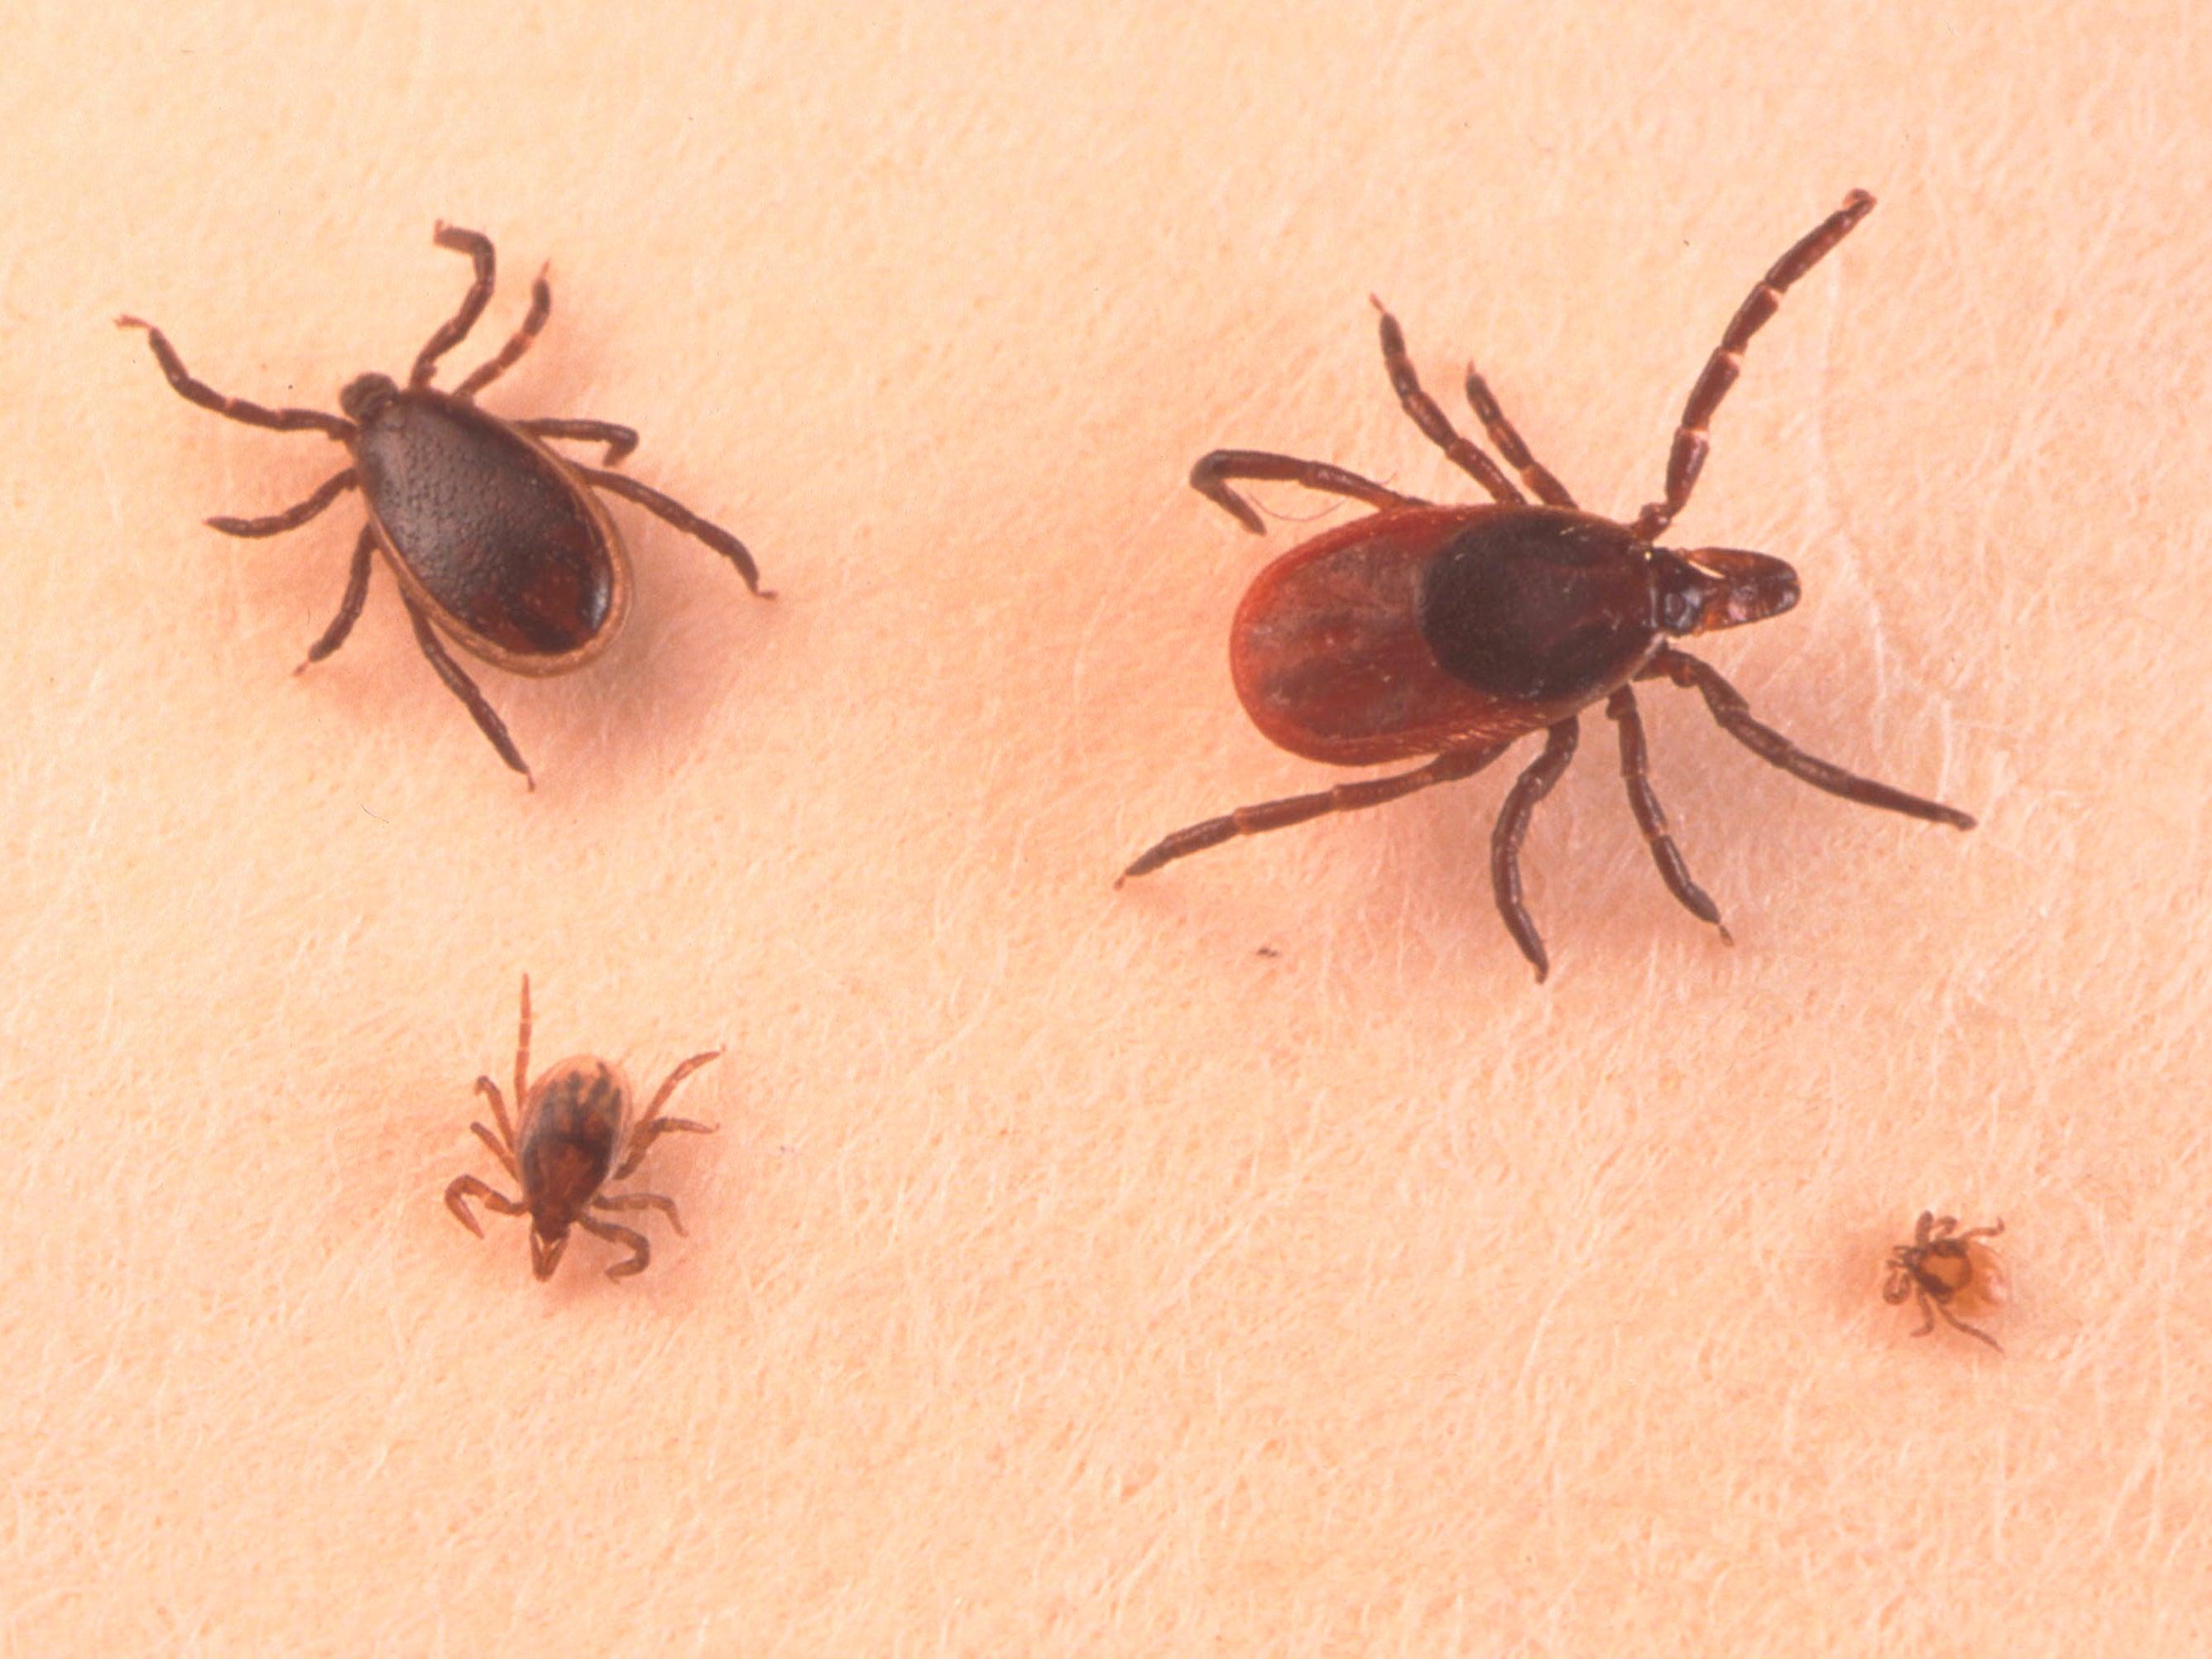 Adult ticks in close up